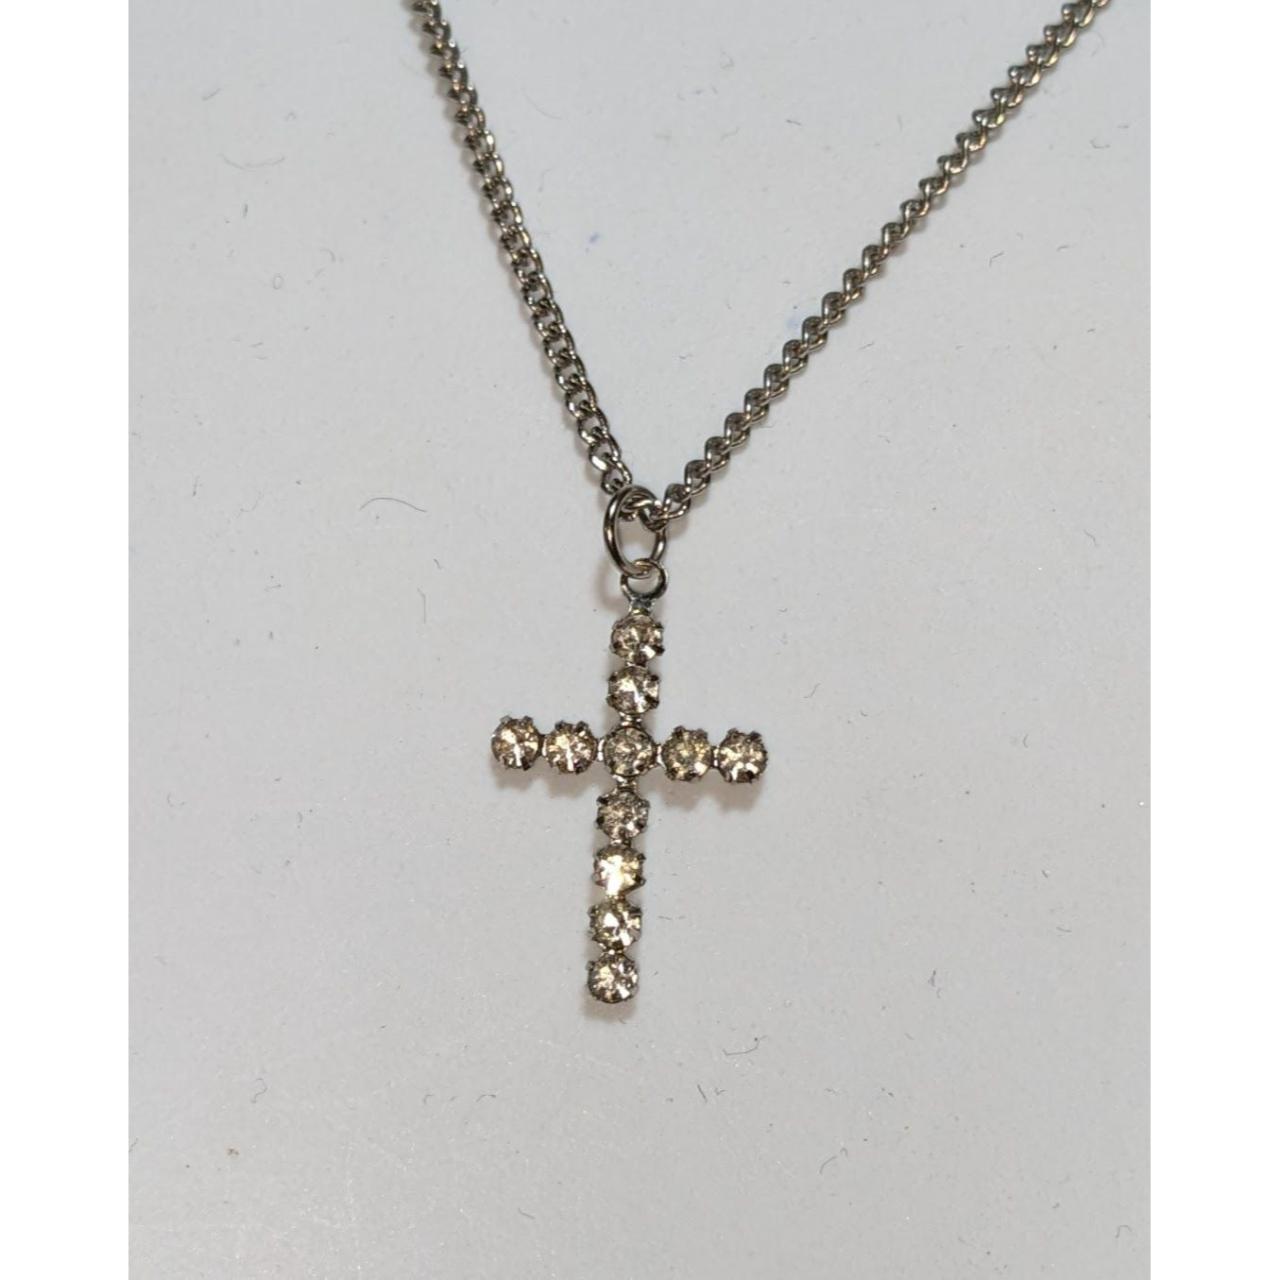 1pc Rhinestone Cross Pendant Necklace Jewelry for Women Gift for Her  Necklace | eBay